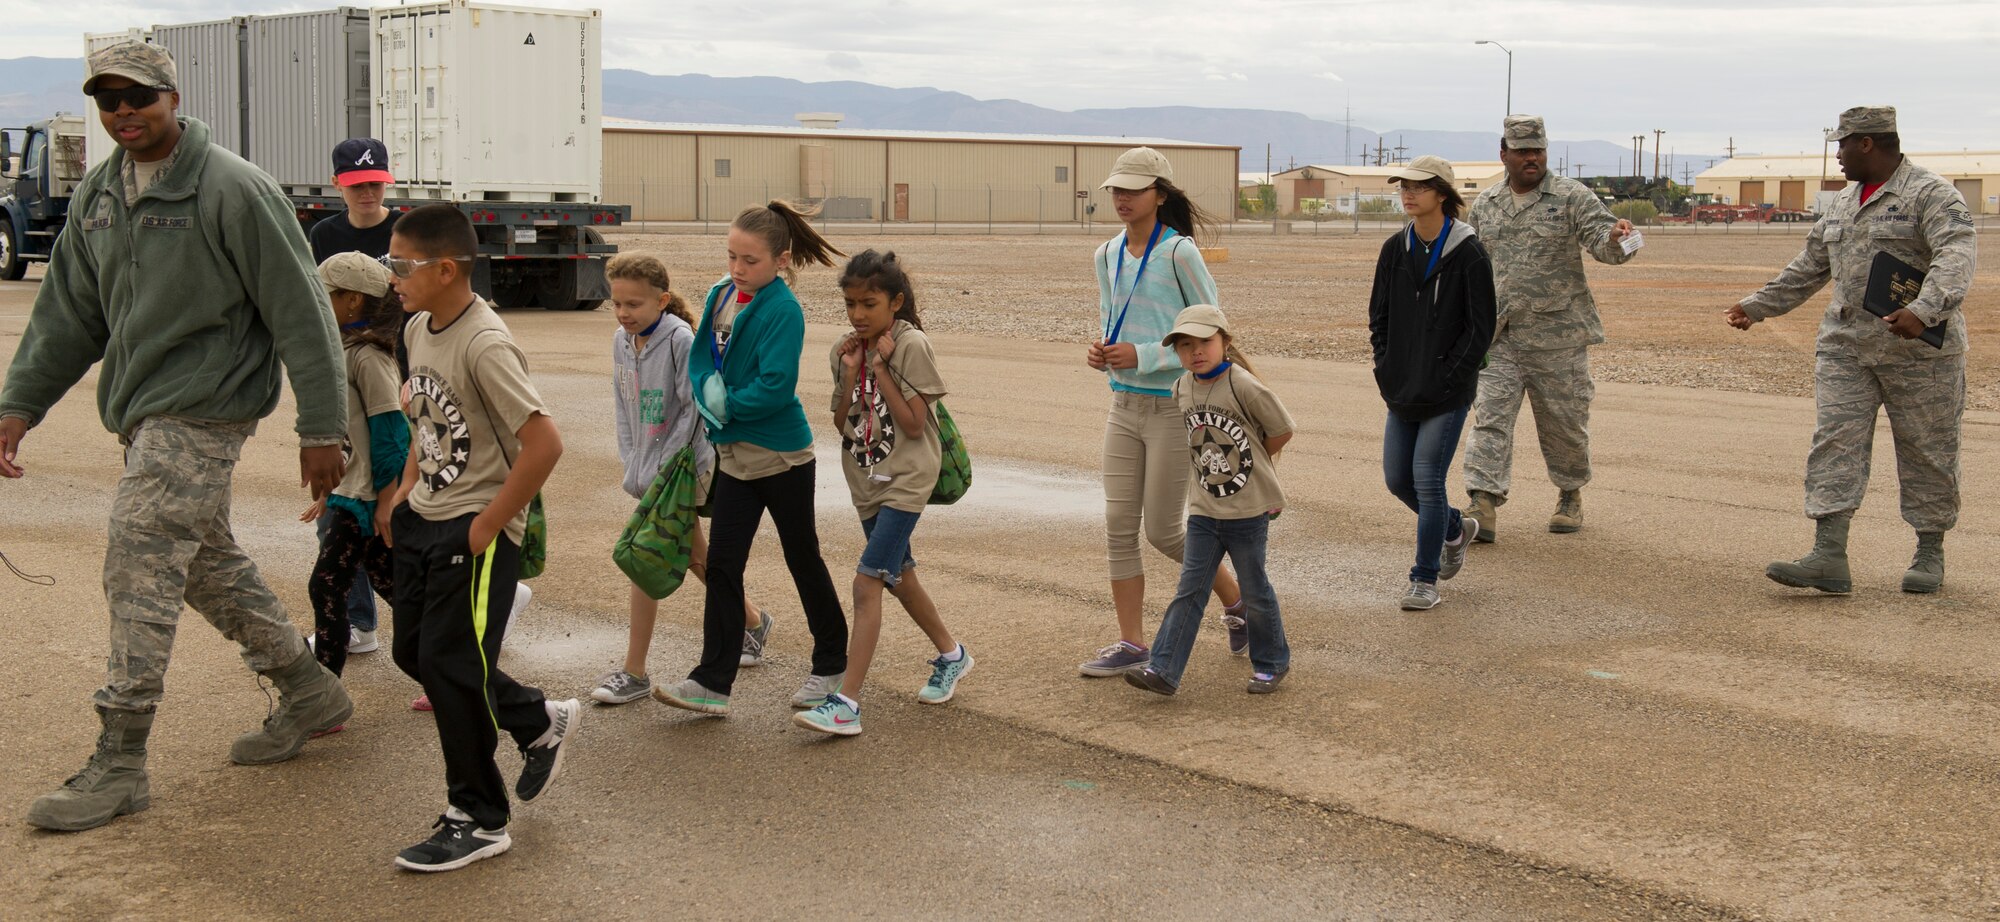 An Airman from Holloman’s Basic Expeditionary Airfield Resources (BEAR) Base leads a group of children to the next station during Operation K.I.D. (Kids Investigating Deployment), April 8 at Holloman Air Force Base, N.M. April is the Month of the Military Child. The Airmen and Family Readiness Center and Youth Center hosted Operation K.I.D. to expose military children to the different phases of deployment that their active duty family members go through.